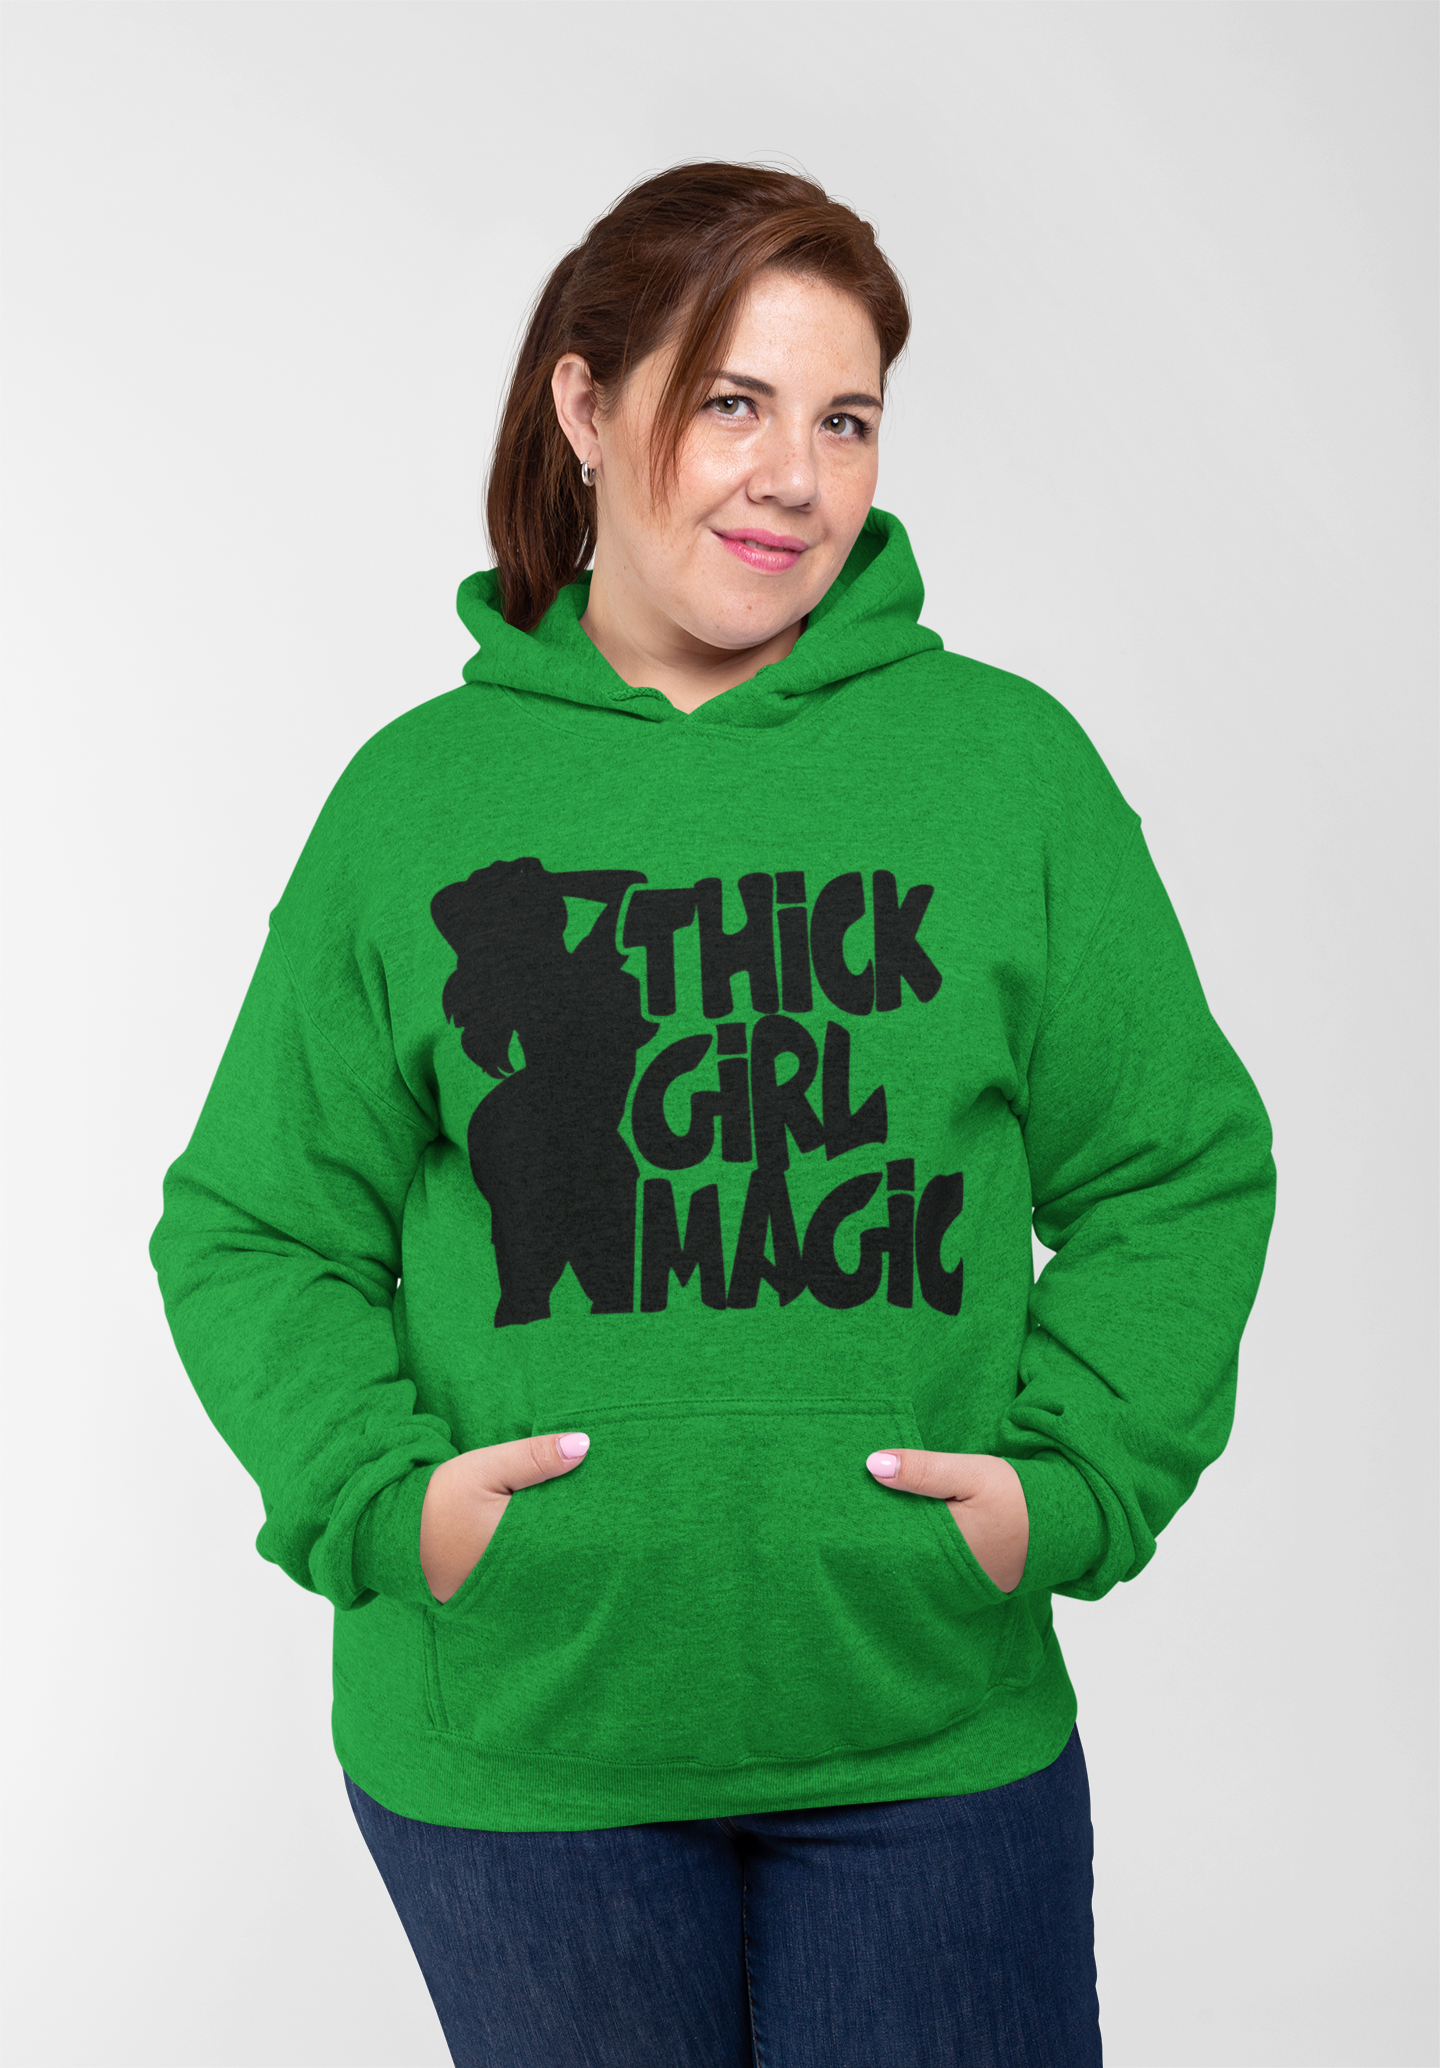 Thick Girl Magic Satin Lined Hoodie